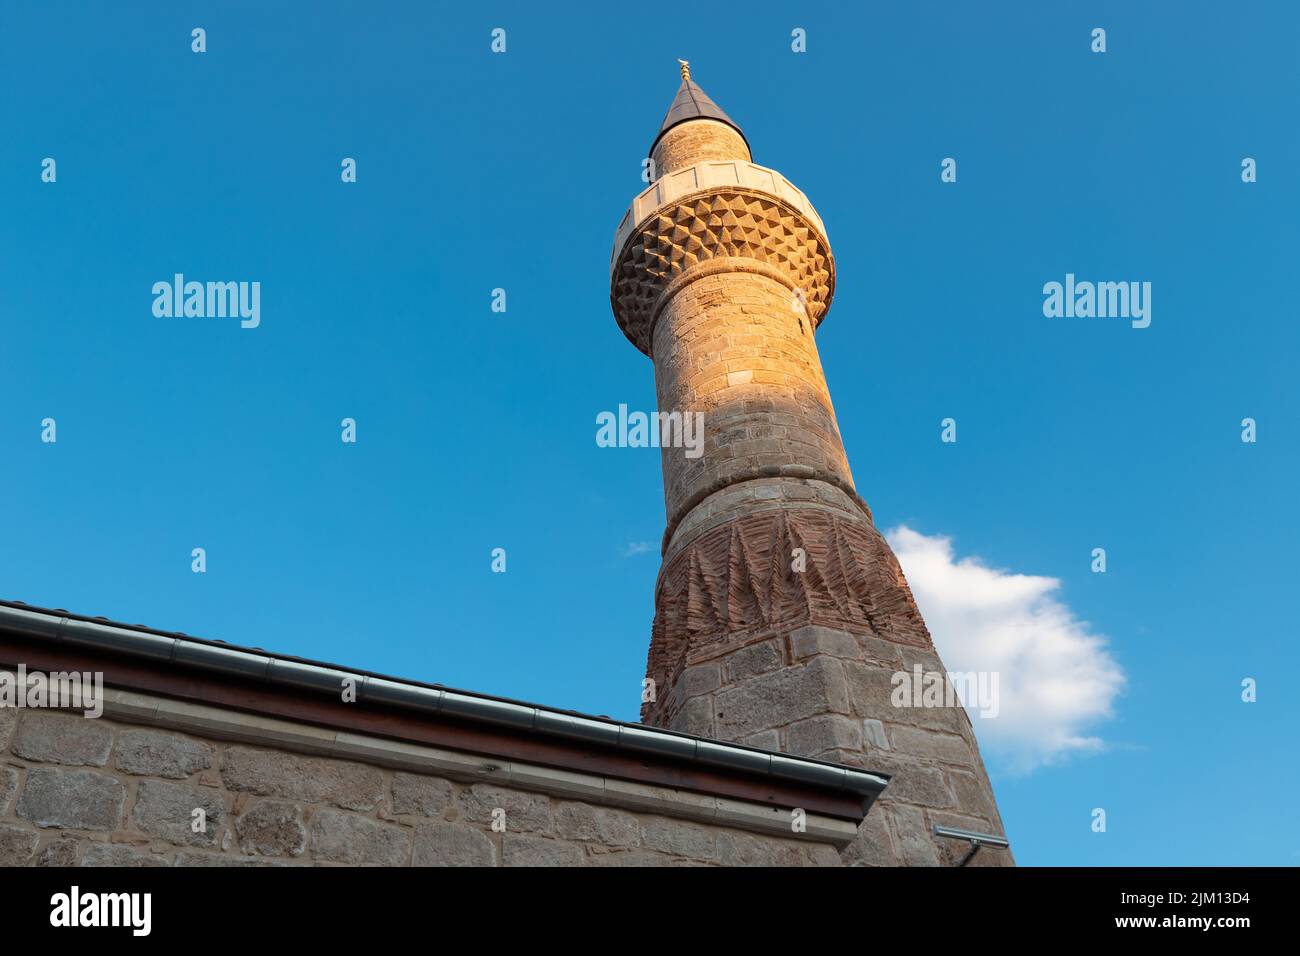 The muezzin call for evening prayer is heard from the minaret of the mosque. Islamic religion and traditional holidays concept Stock Photo